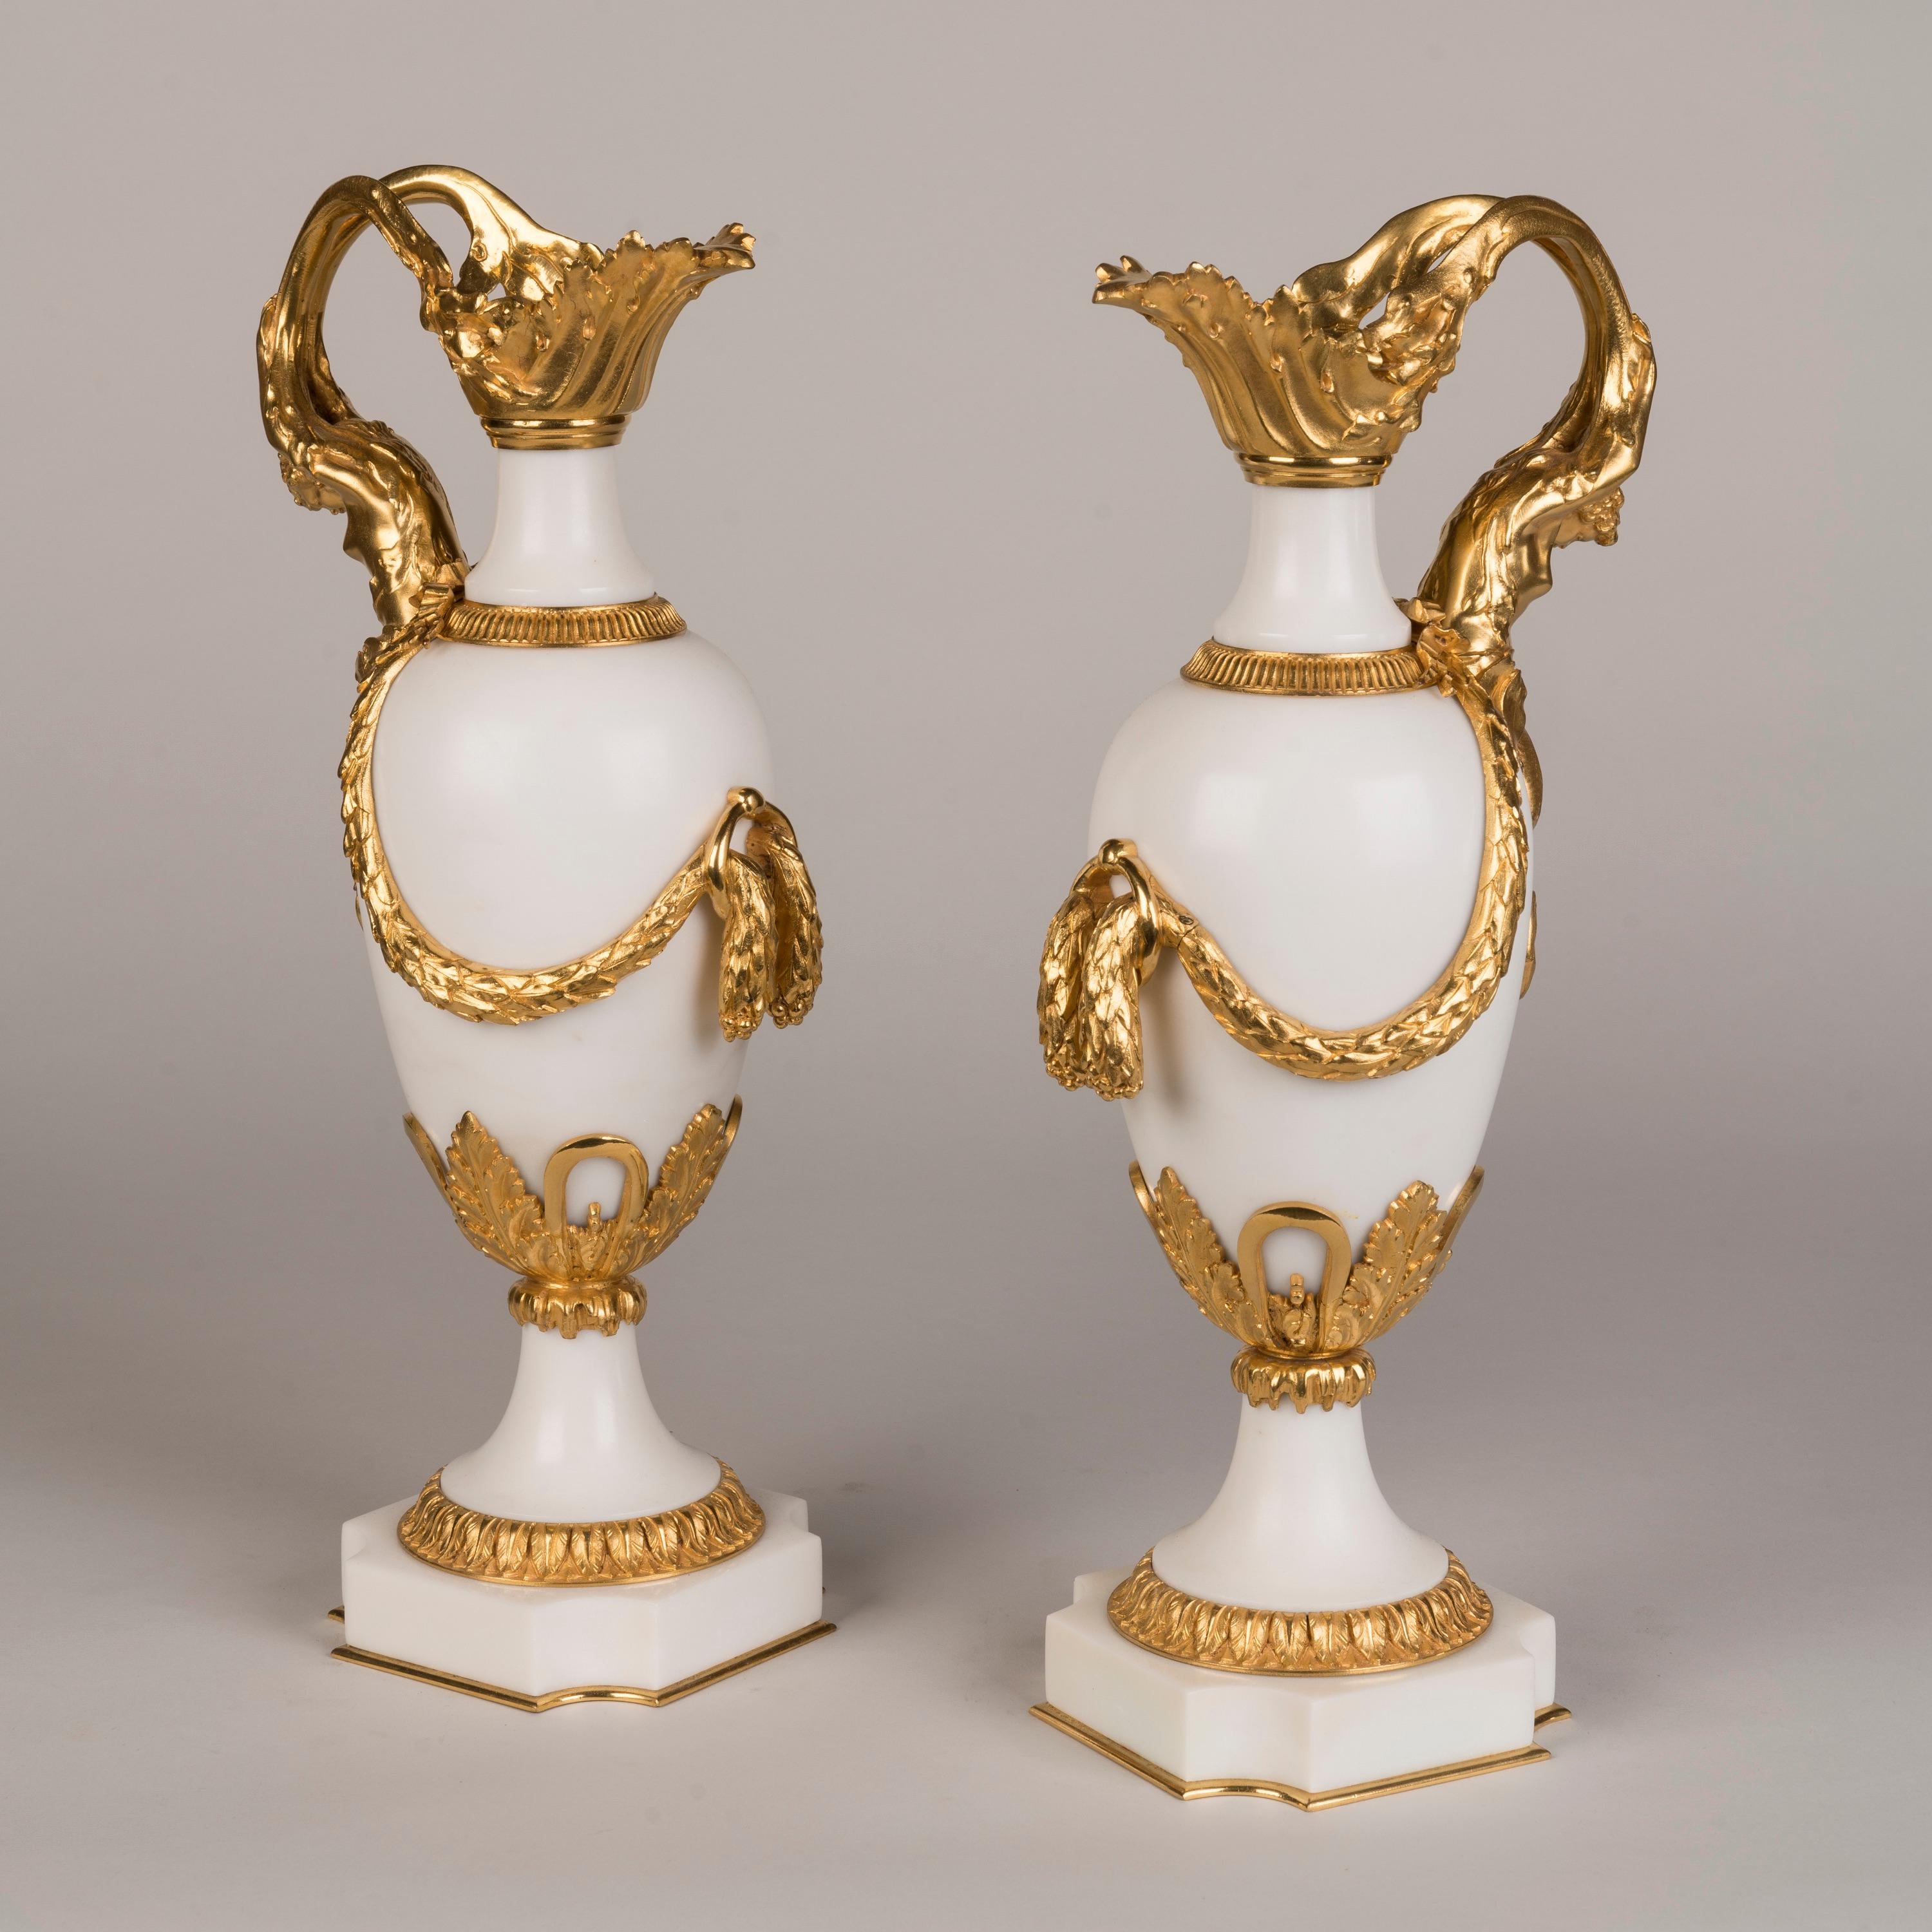 A Pair of Ormolu-Mounted Marble Vases
In the Louis XVI Style

Each vase of ovoid shape carved from pure Carrara marble, on incurved bases and waisted socles with stiff-leaf borders, extensively ormolu-mounted with a shaped spout emanating a